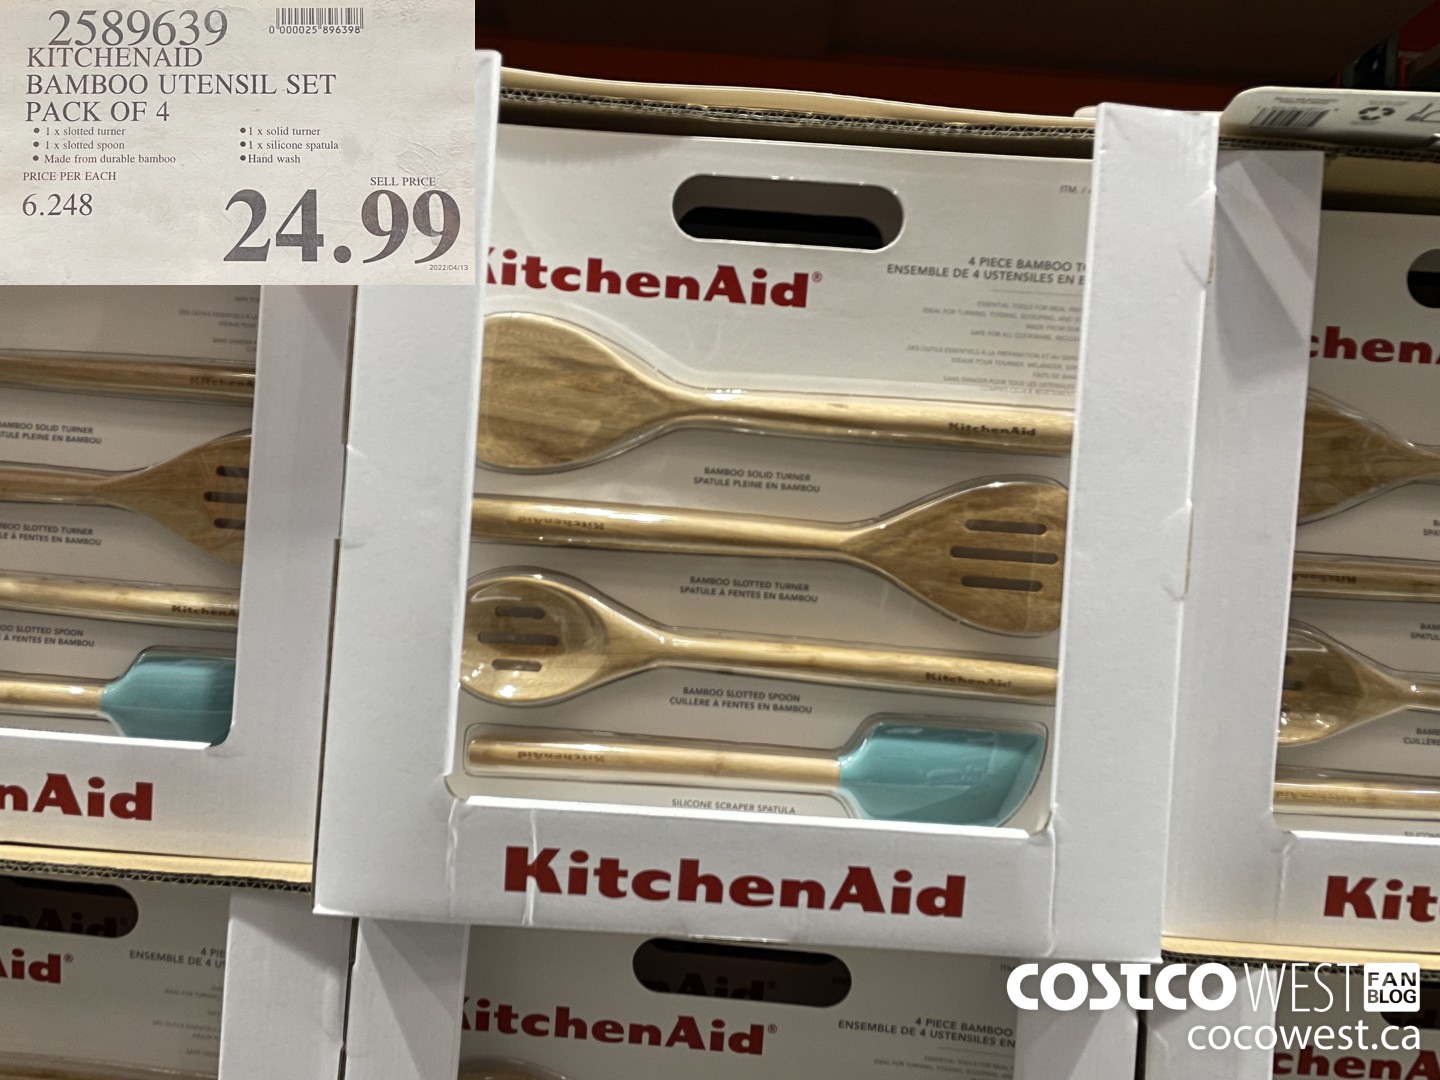 Costco Aisles - 3-Piece Silicone Turner Set. You'll get